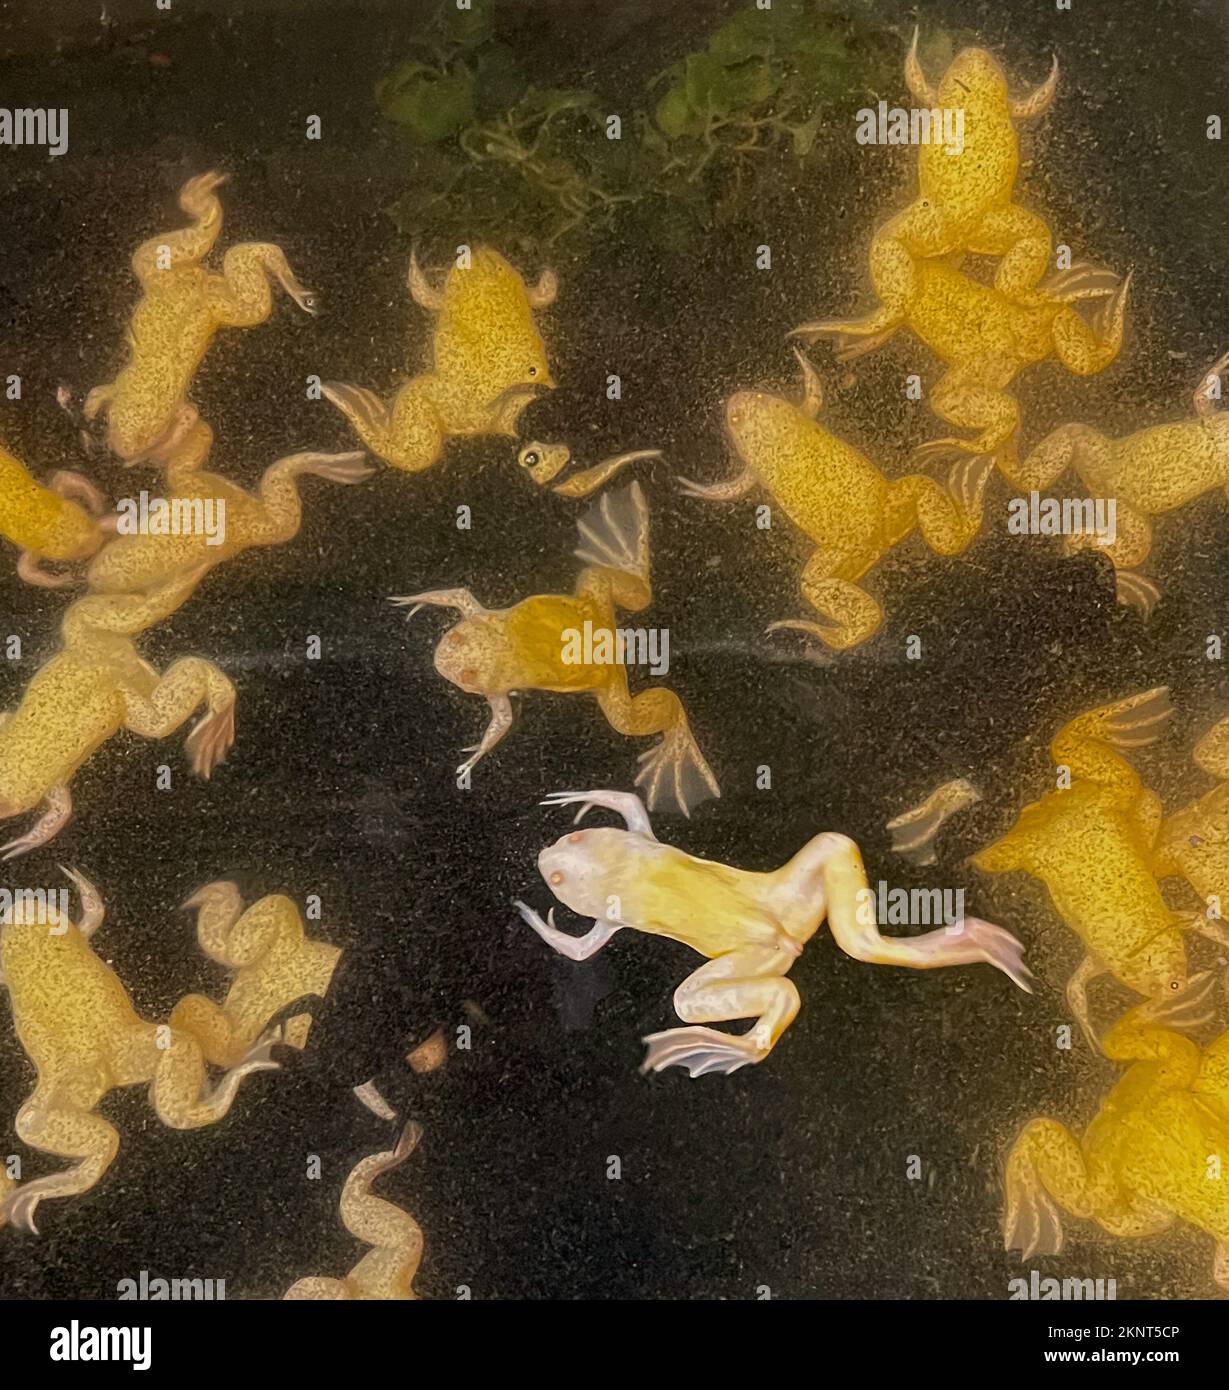 See yellow frogs, amphibians, shown in the big tank of water where they are raised for science and hobby. You can see their webbed feet. Stock Photo